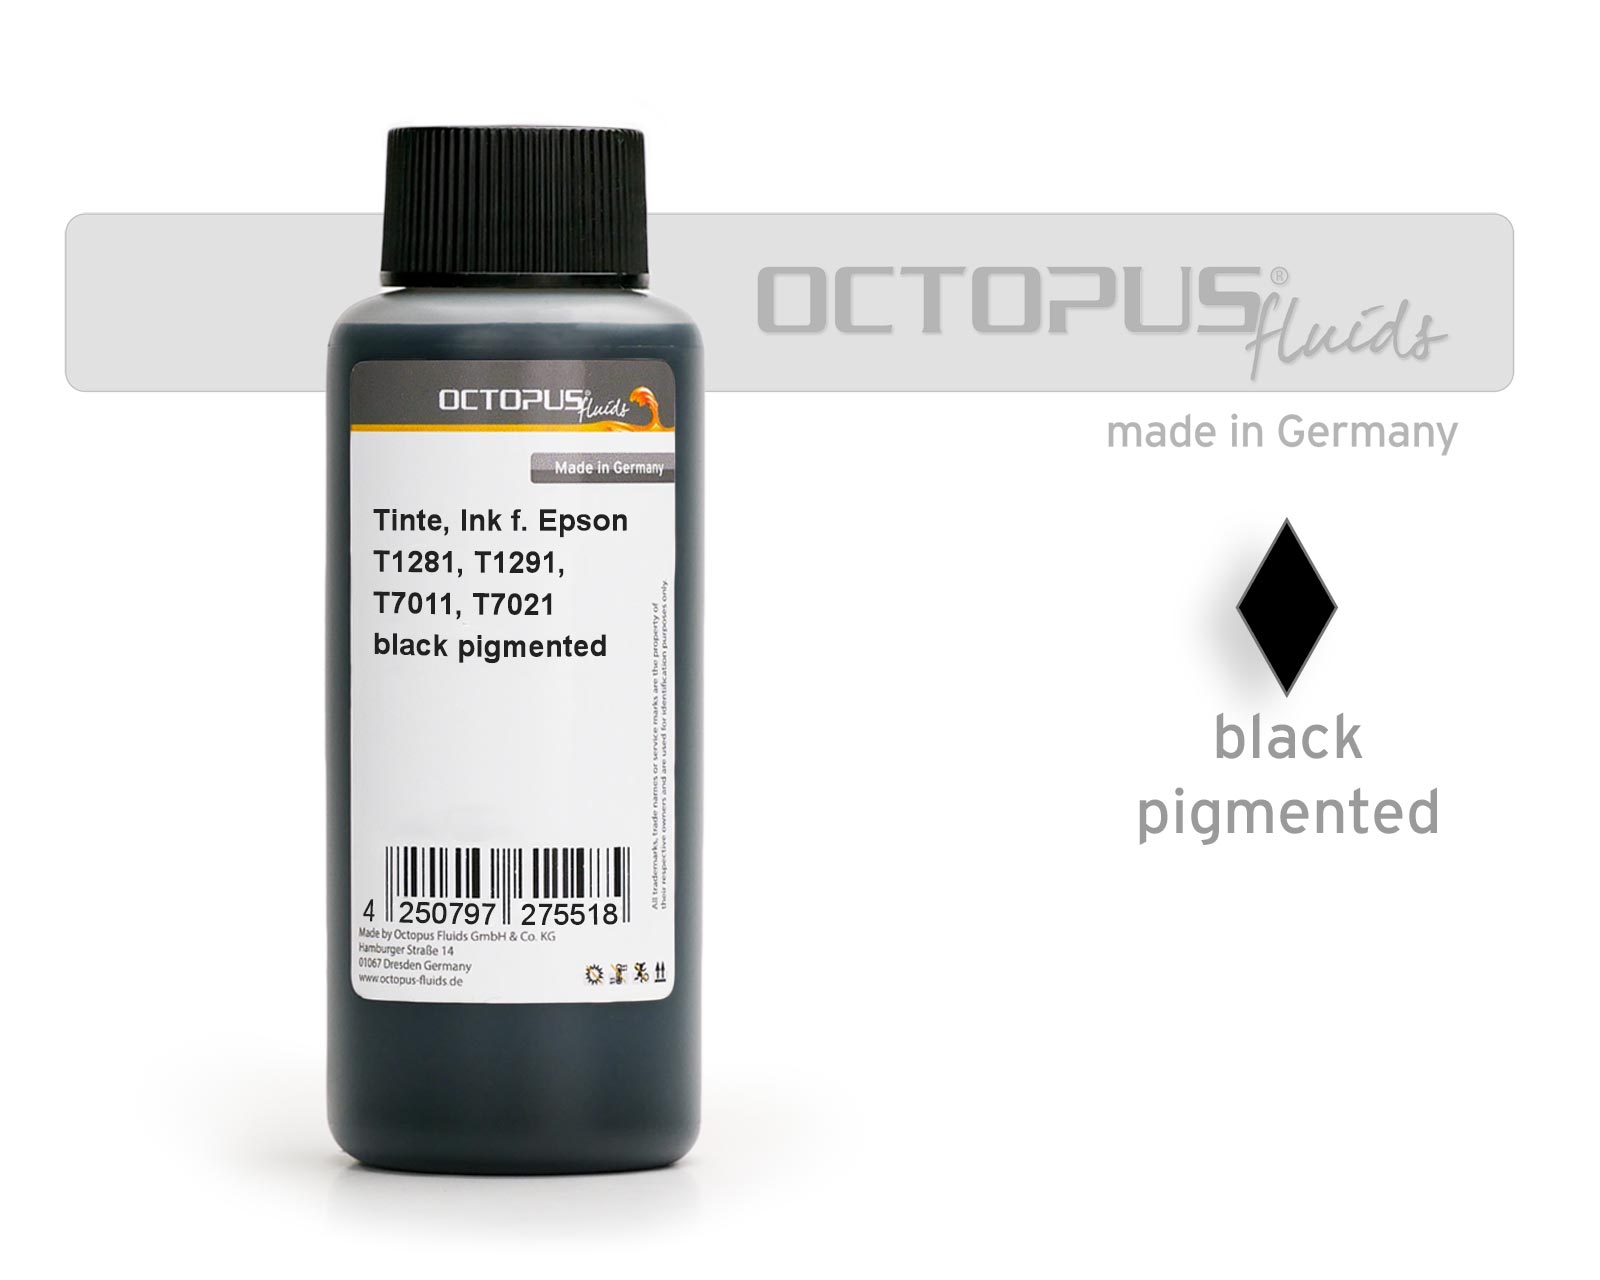 Octopus Refill Ink for Epson T1281, T1291, T7011, T7021 pigmentiert black